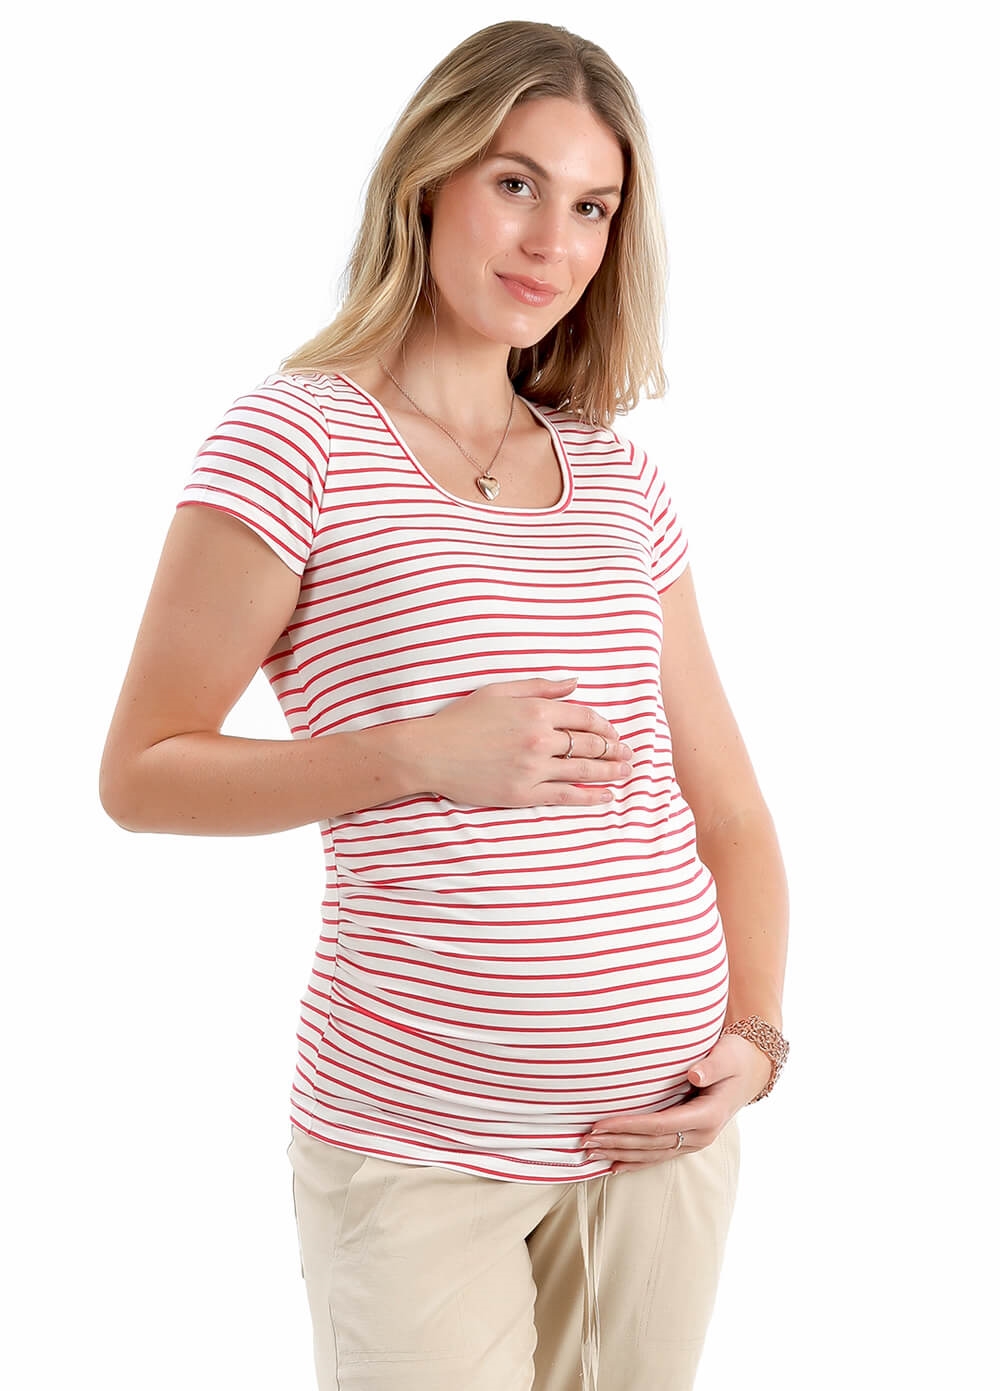 Lily Dream Maternity Tee in Pink Stripe by Trimester Clothing